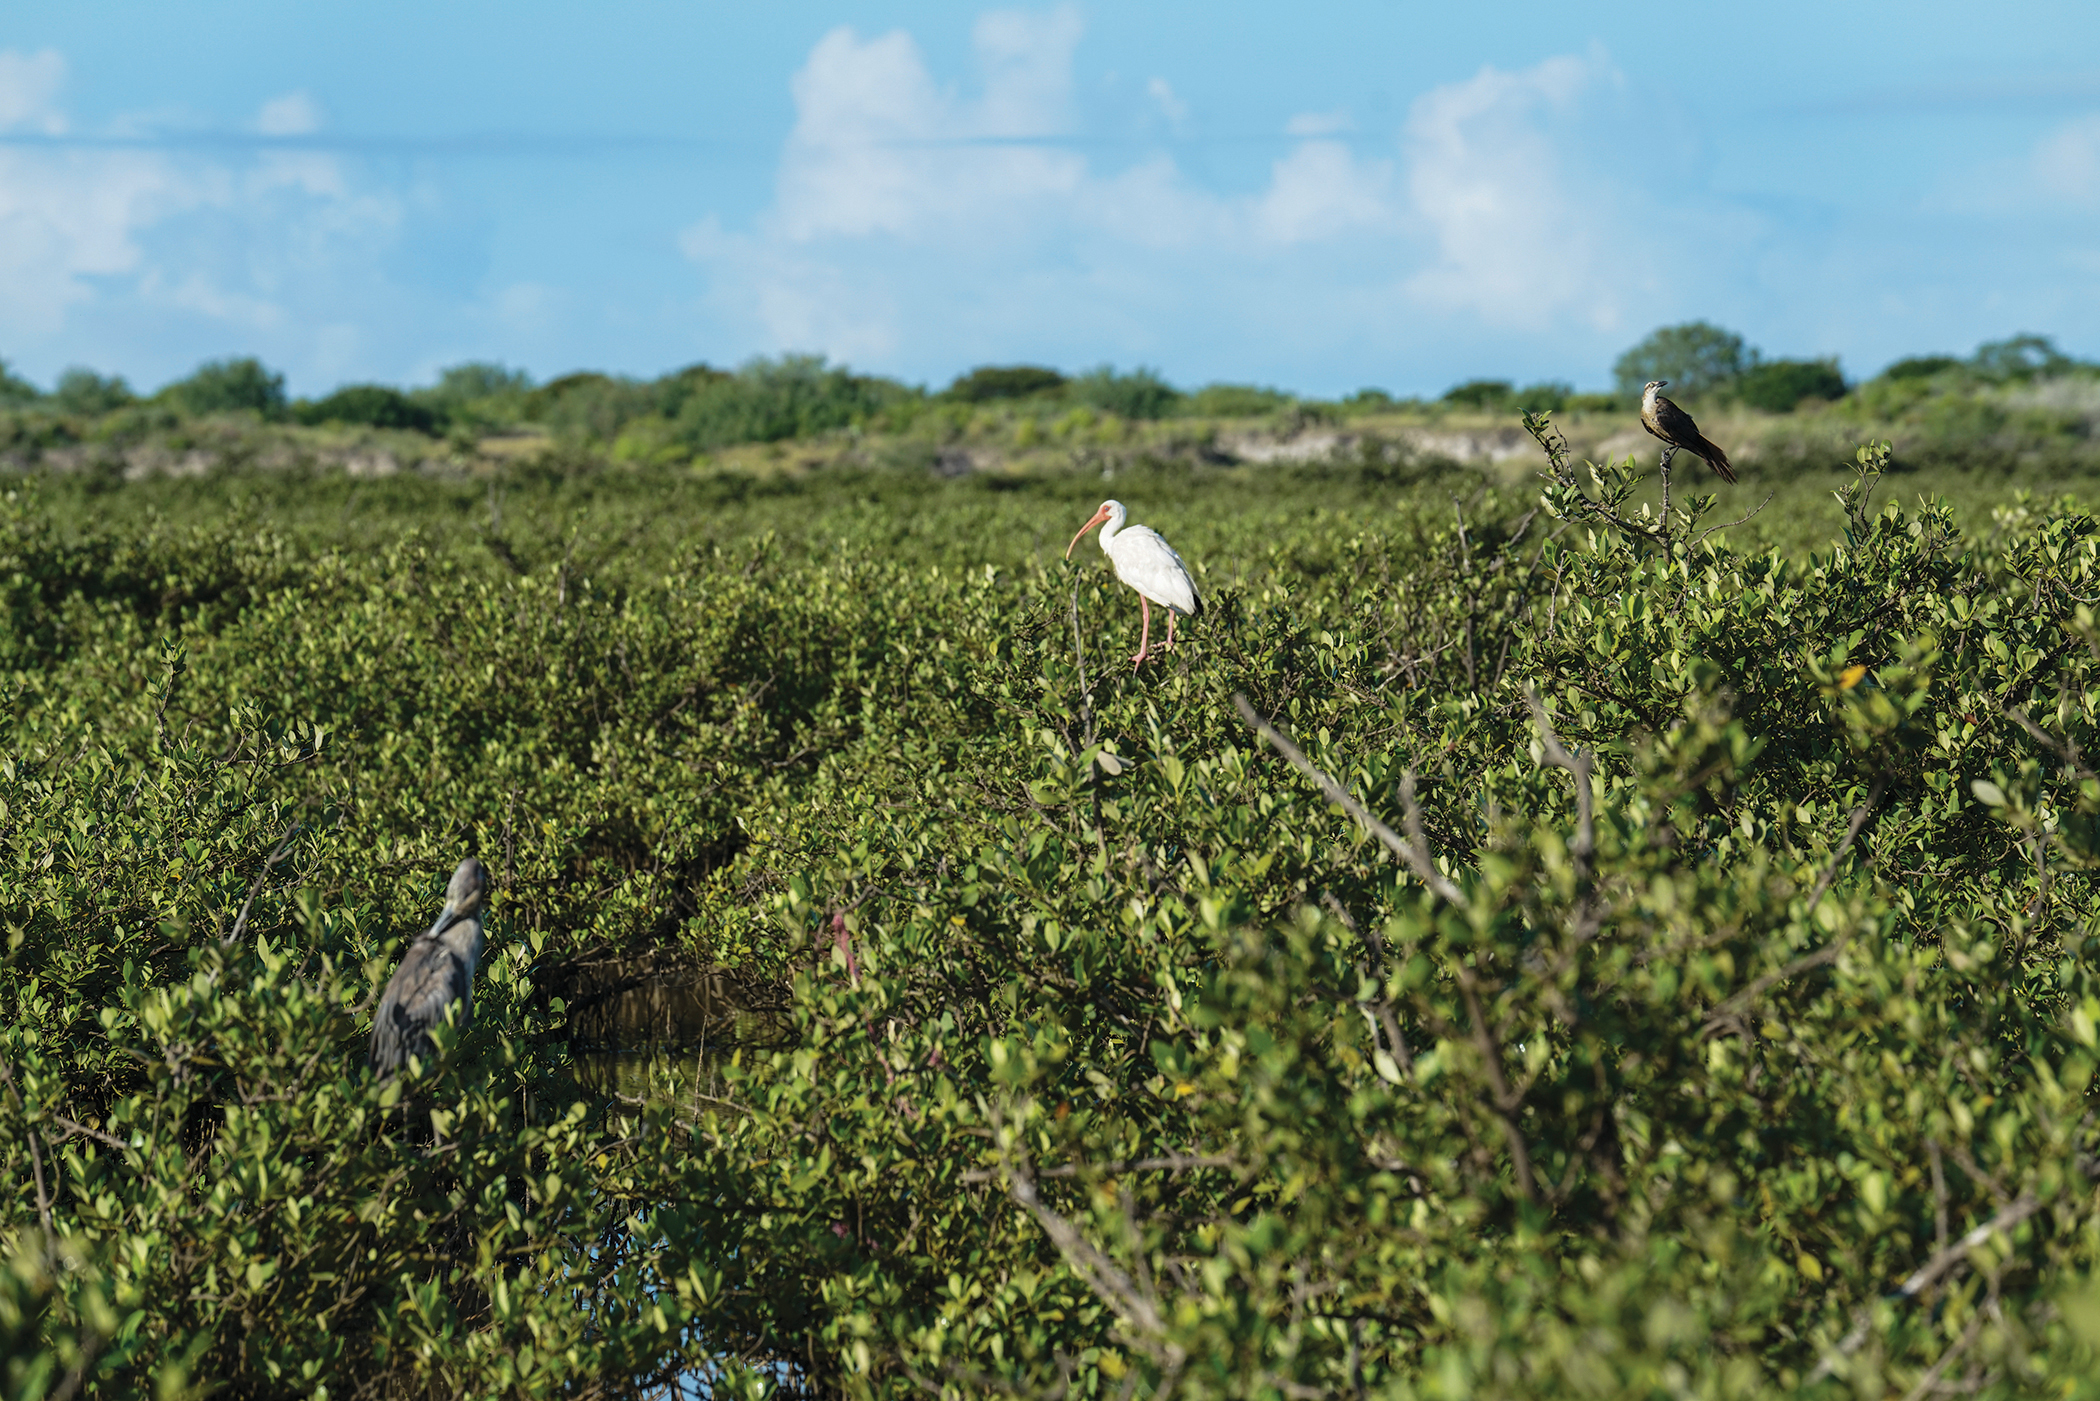 Birds perch among mangroves at a proposed LNG site.